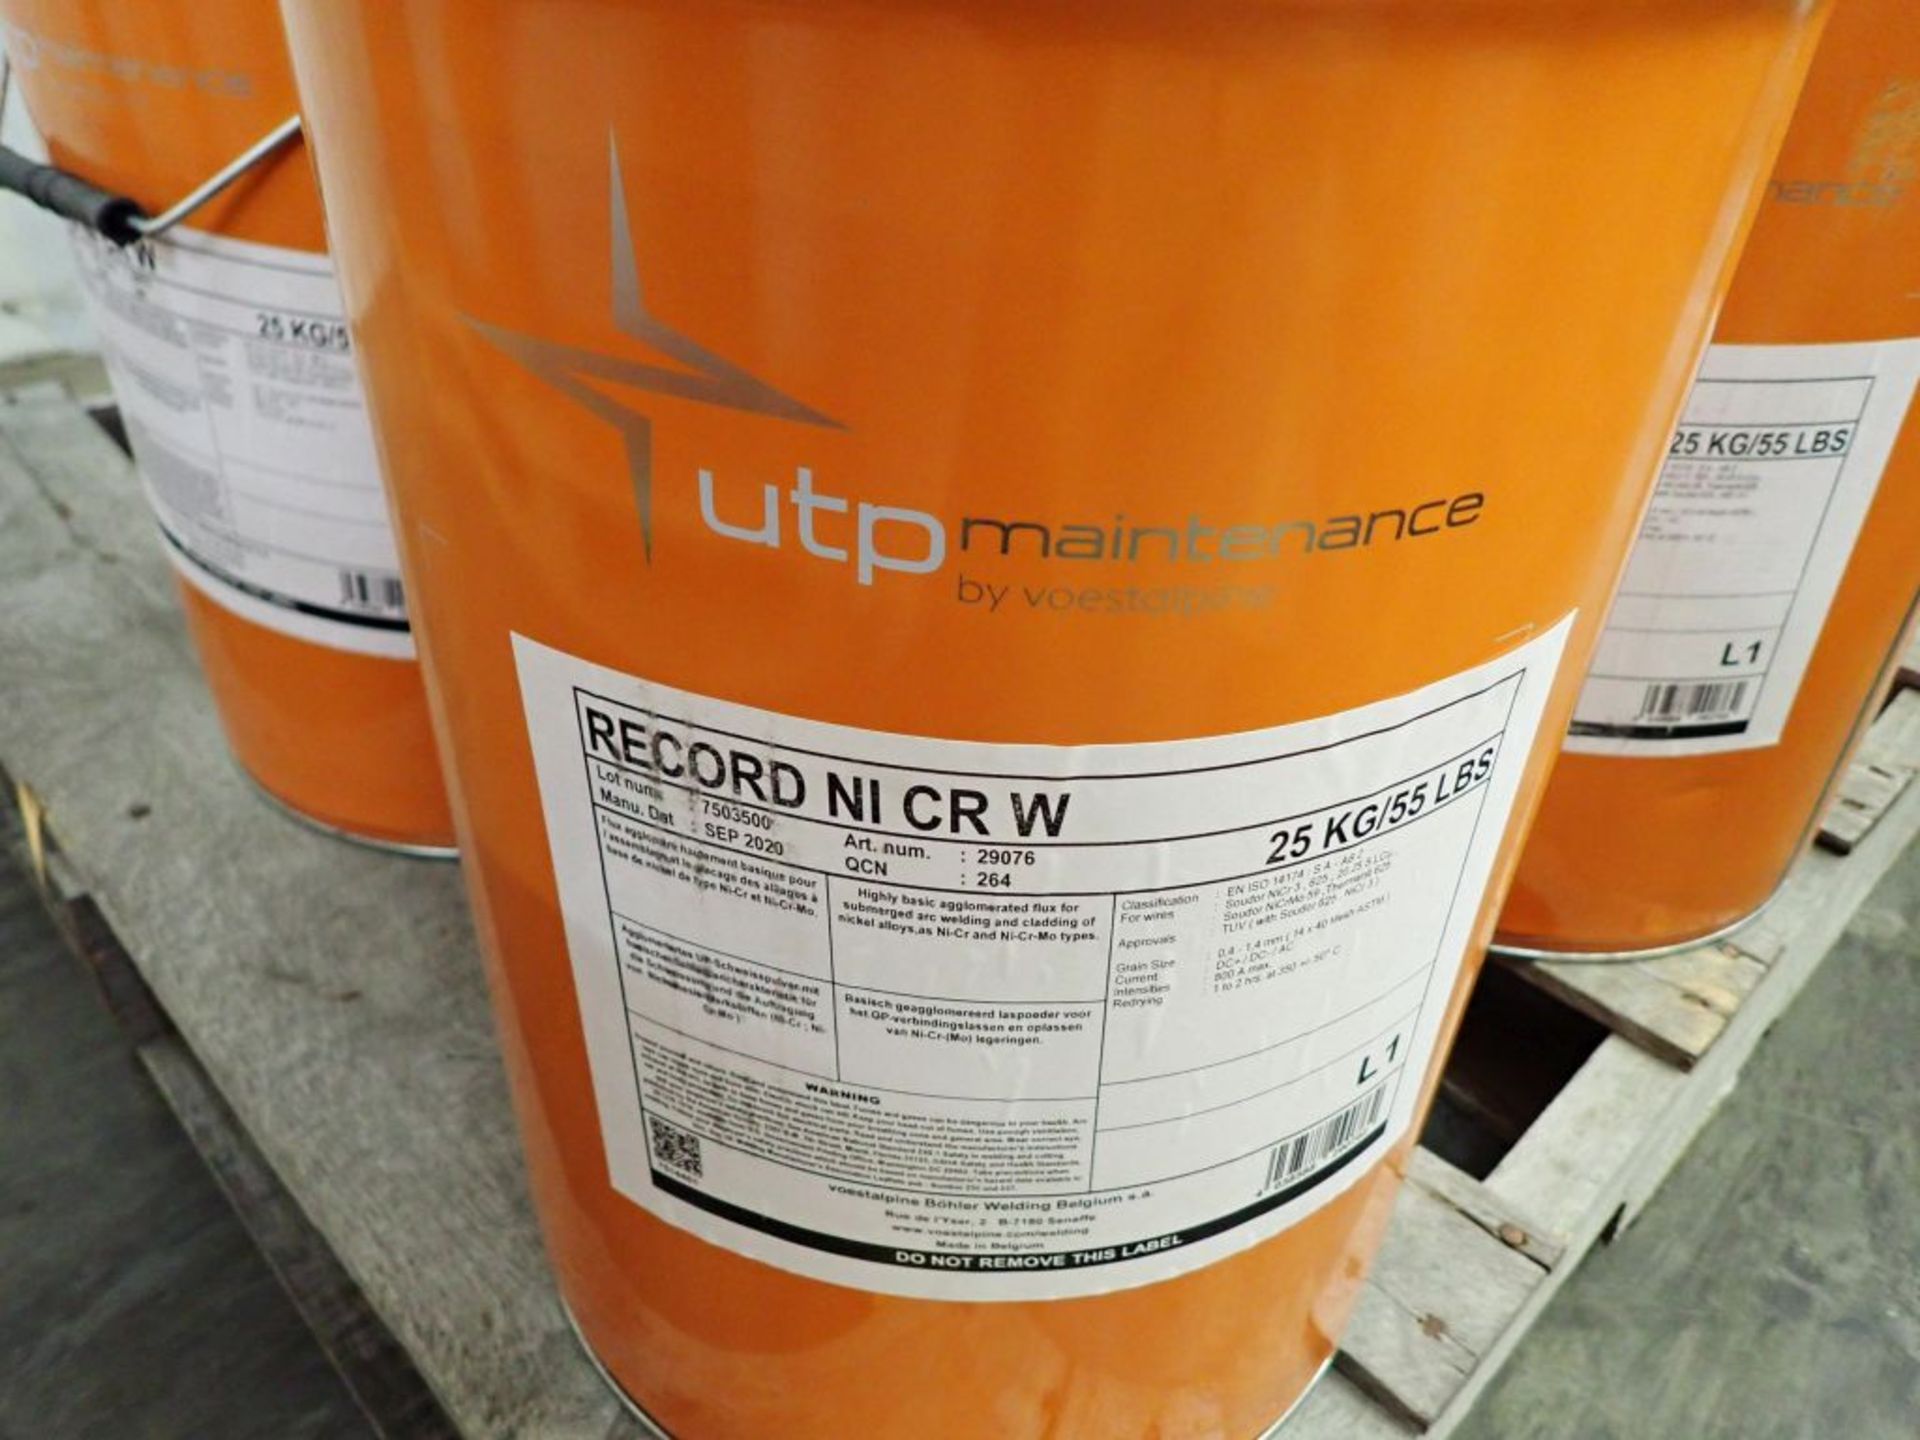 Lot of (7) UTP Maintenance Record NI CR W Strips - Image 3 of 5